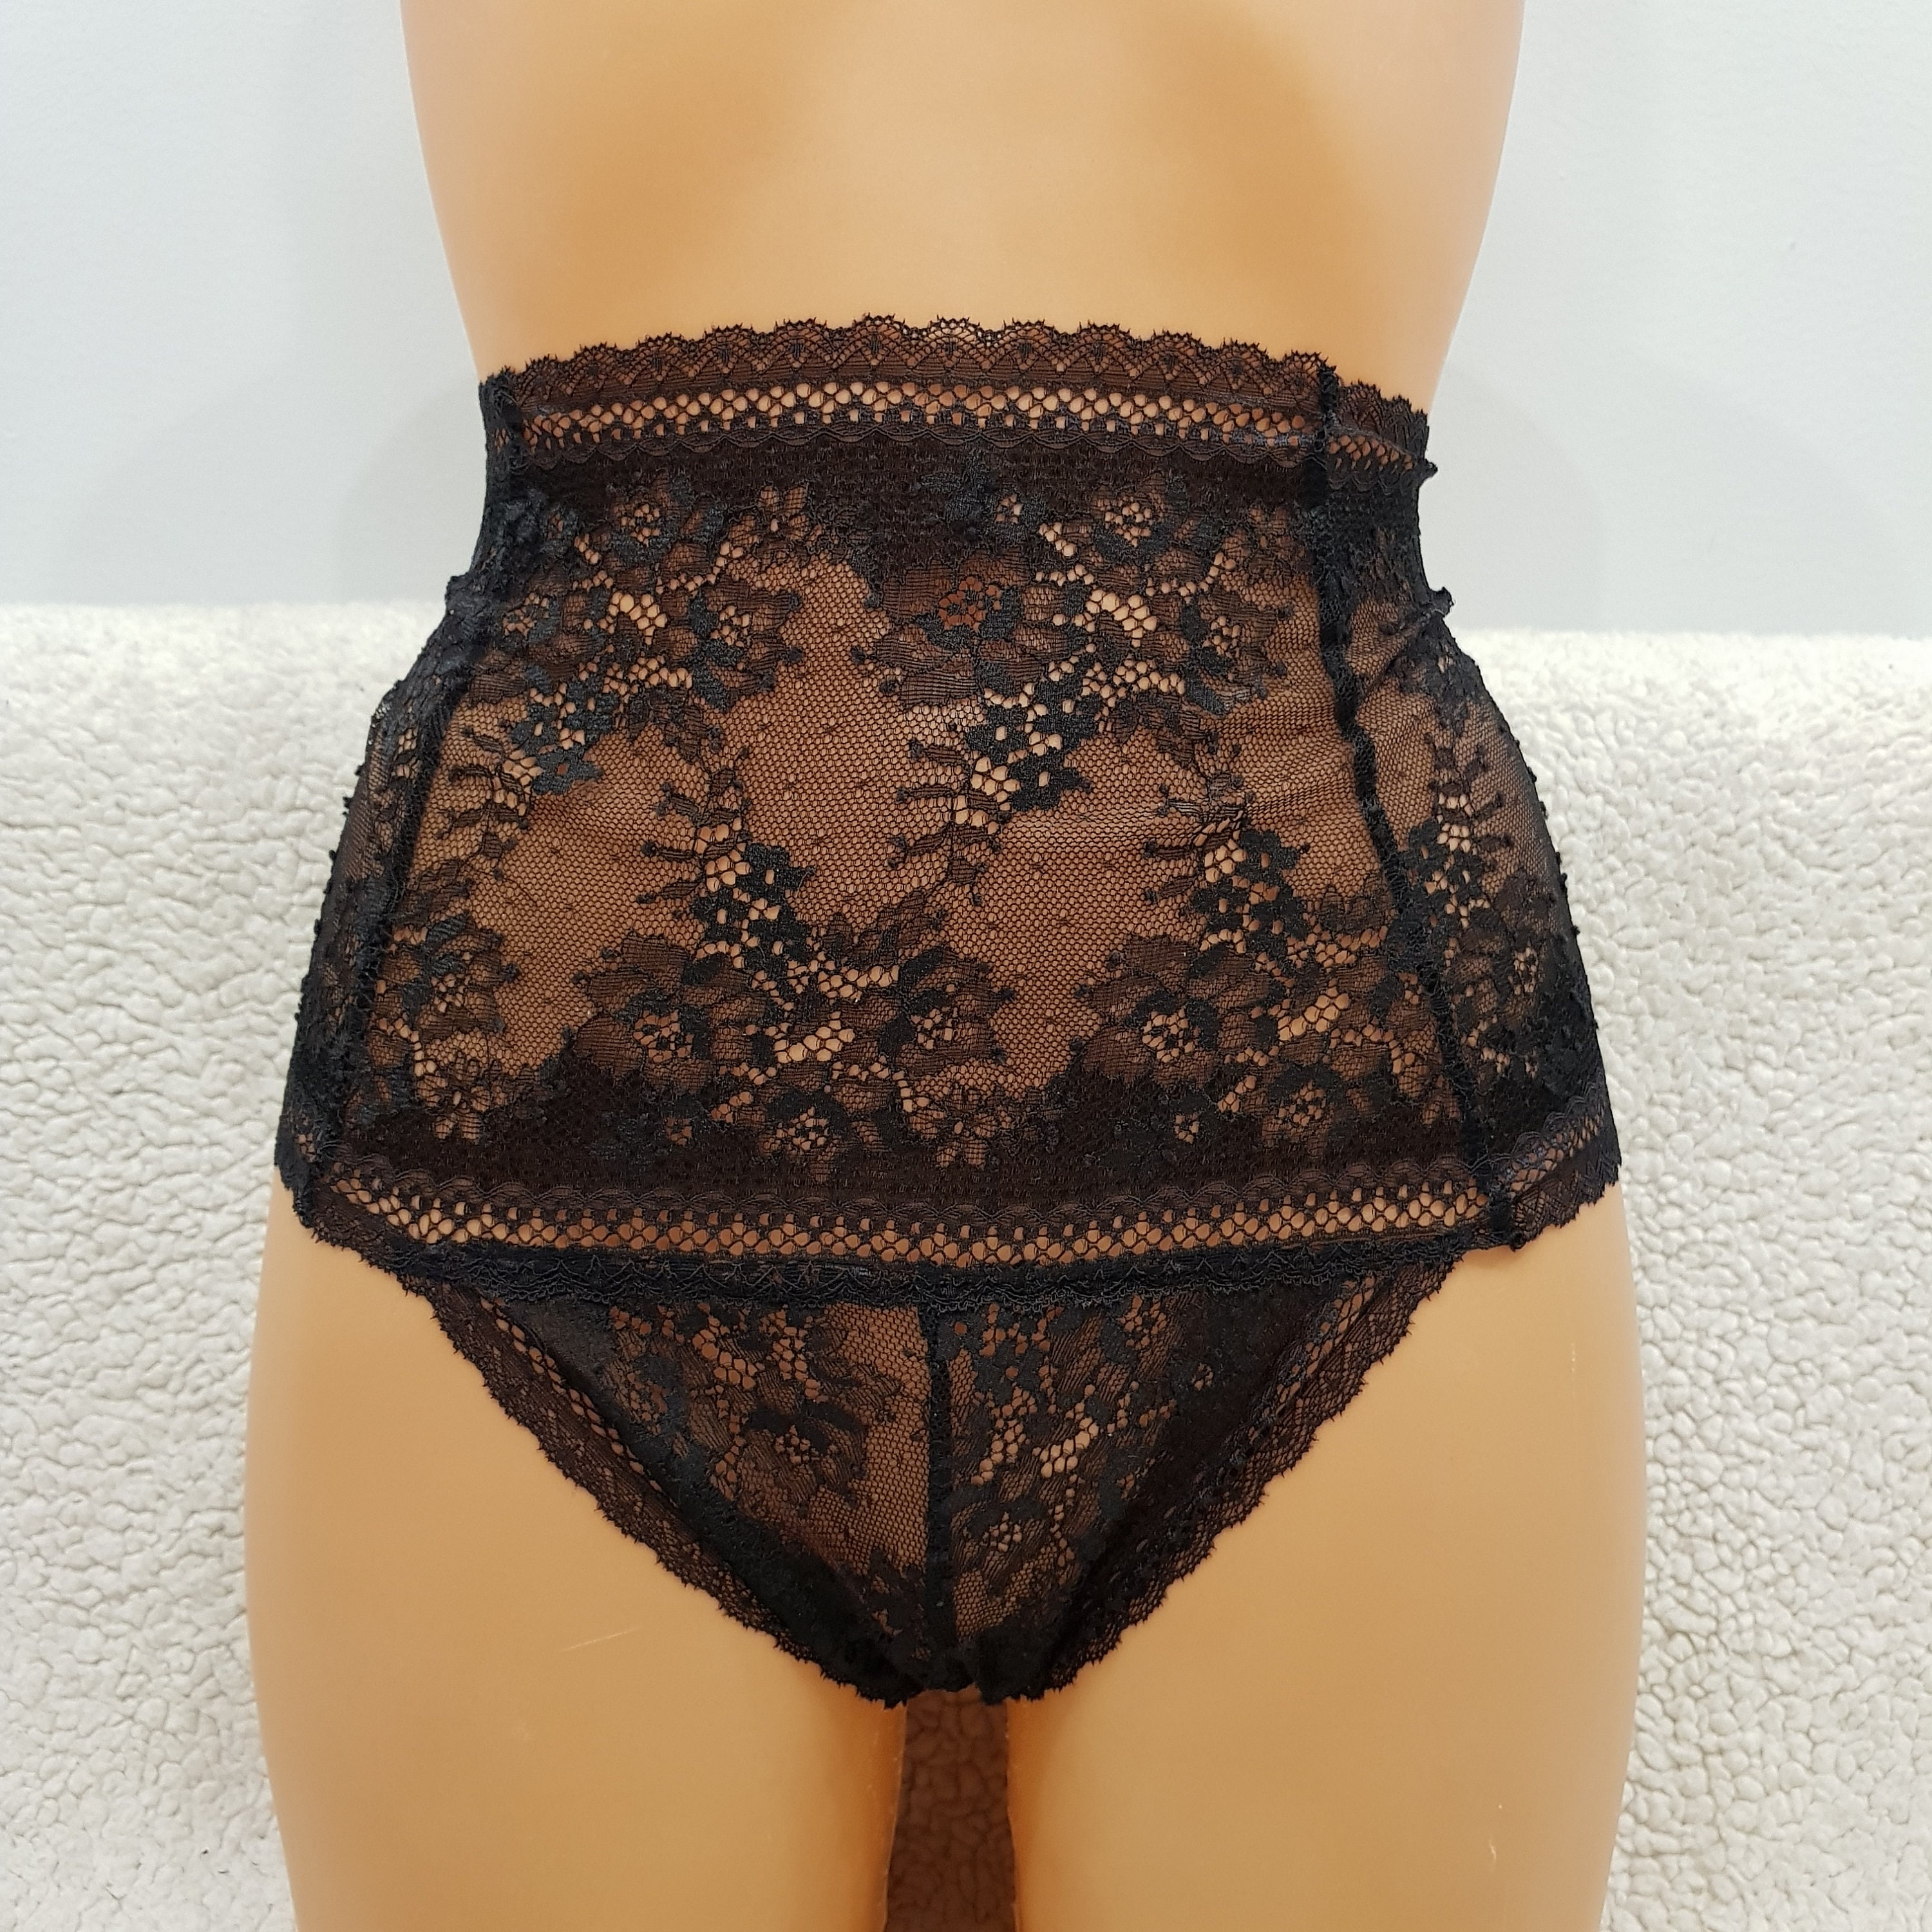 Wide Elastic,black Lace,handmade,bubble Fabric,crotchless Panties,wedding, crotchless,lace Panties,lingerie Woman,night Thong,underwear 